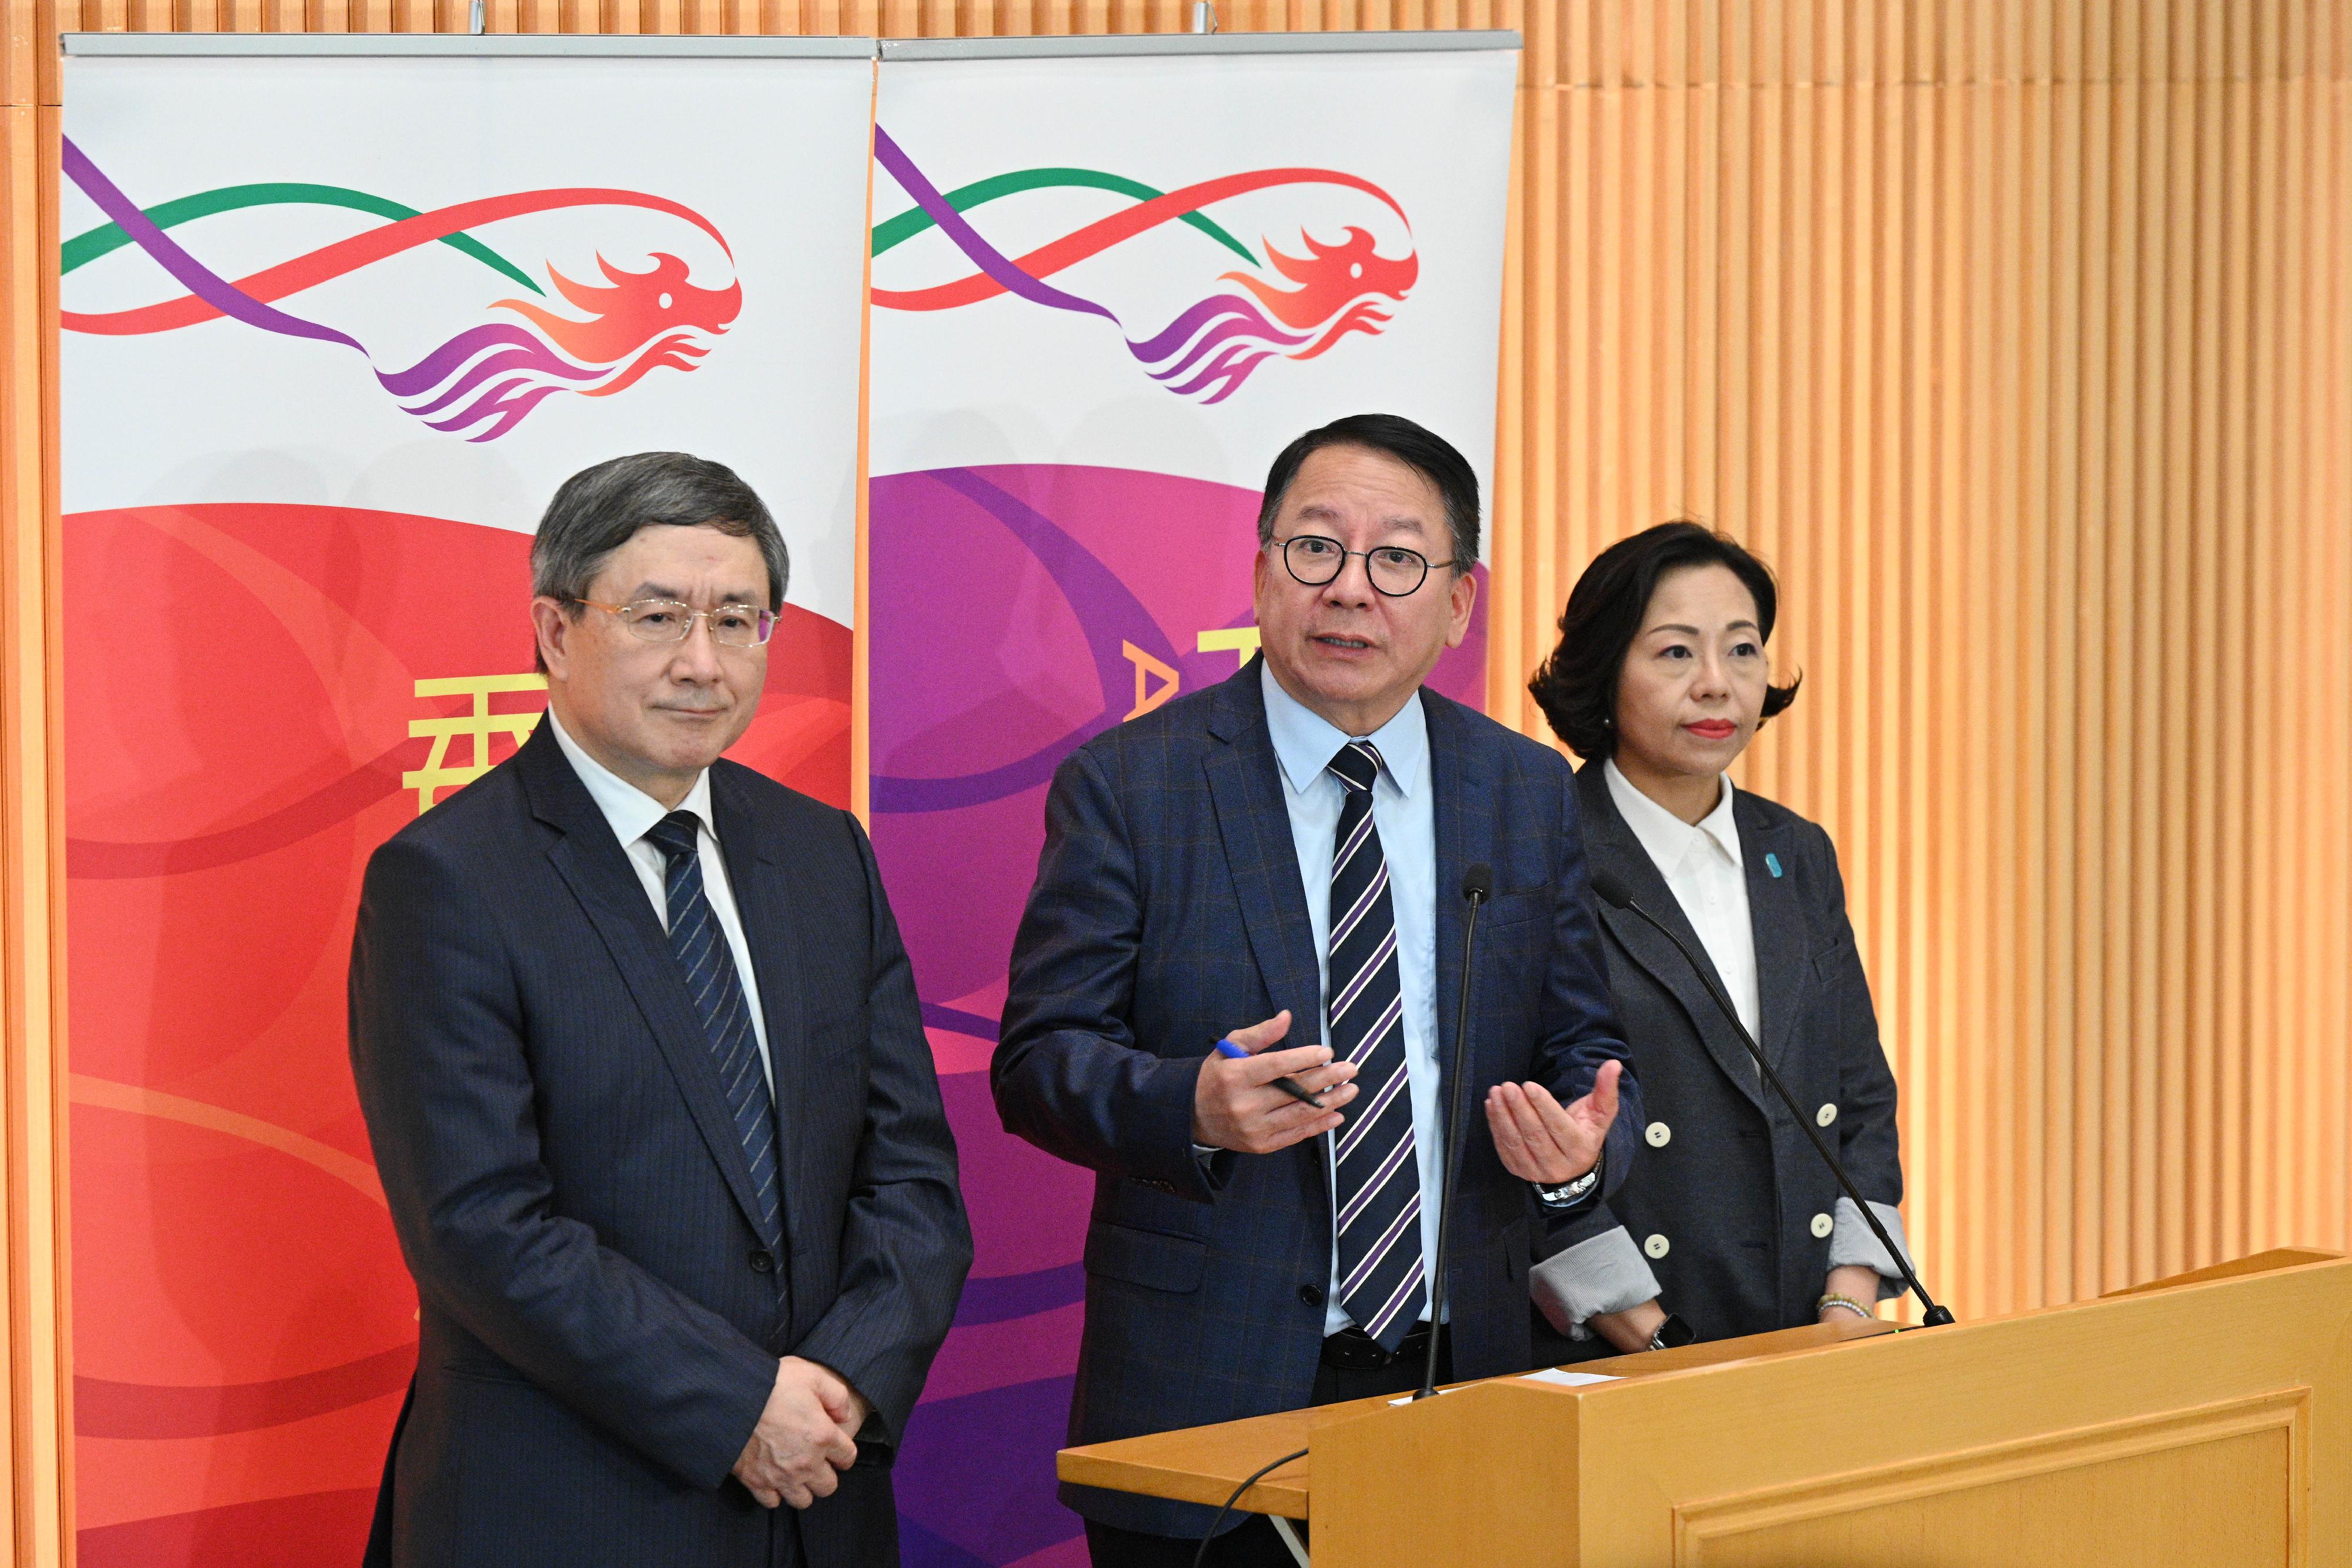 The Chief Secretary for Administration, Mr Chan Kwok-ki (centre), together with the Deputy Chief Secretary for Administration, Mr Cheuk Wing-hing (left), and the Secretary for Home and Youth Affairs, Miss Alice Mak (right), meets the media after chairing the first meeting of the Steering Committee on District Governance today (July 12).